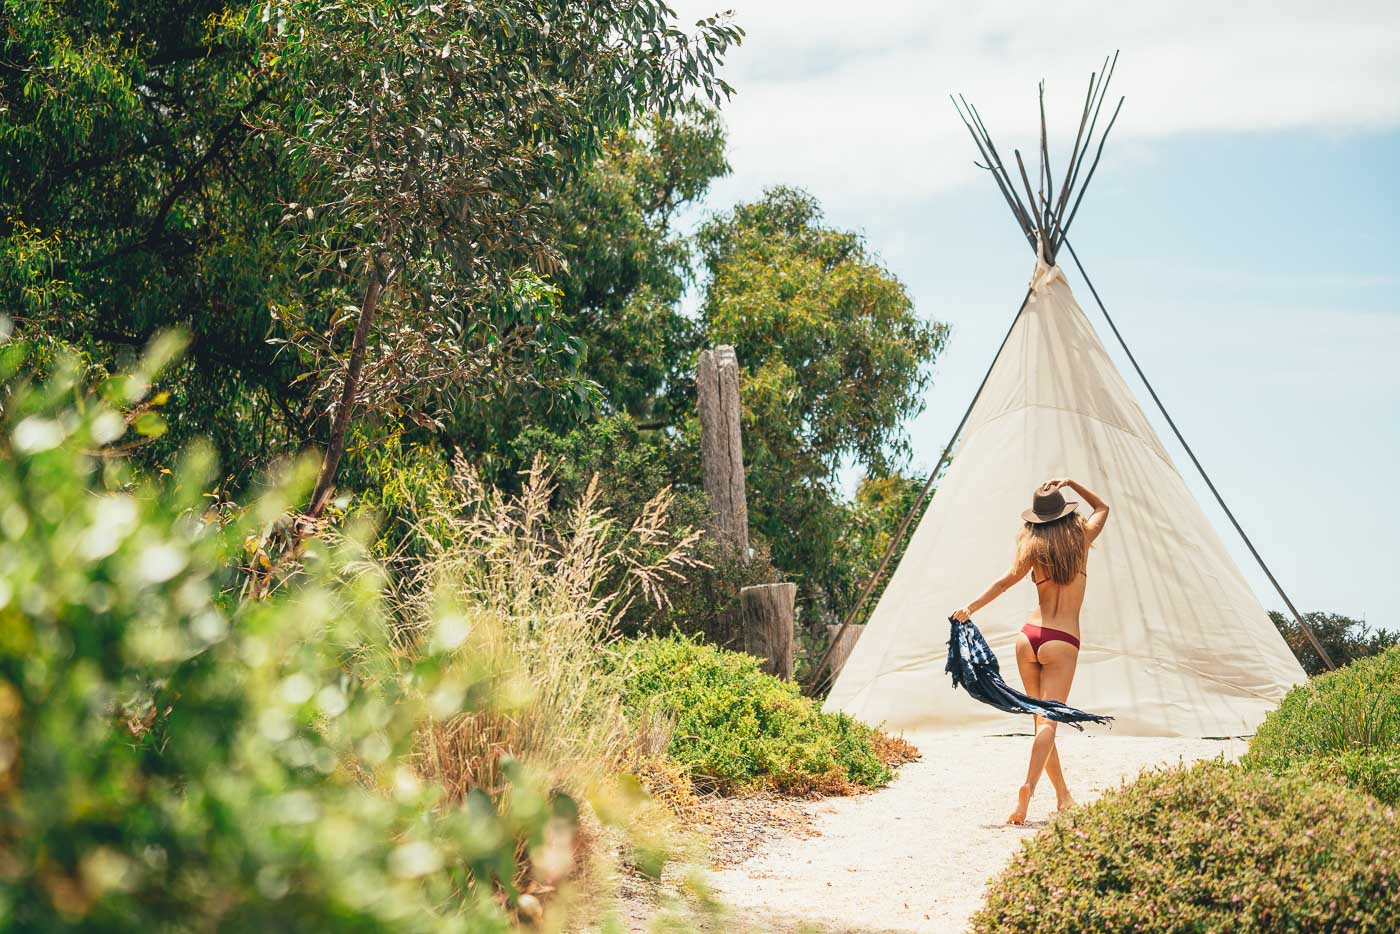 Tristyn Lecia dancing to music at the Bells beach Teepee in Australia. Photo by Sony Ambassador Stefan Haworth